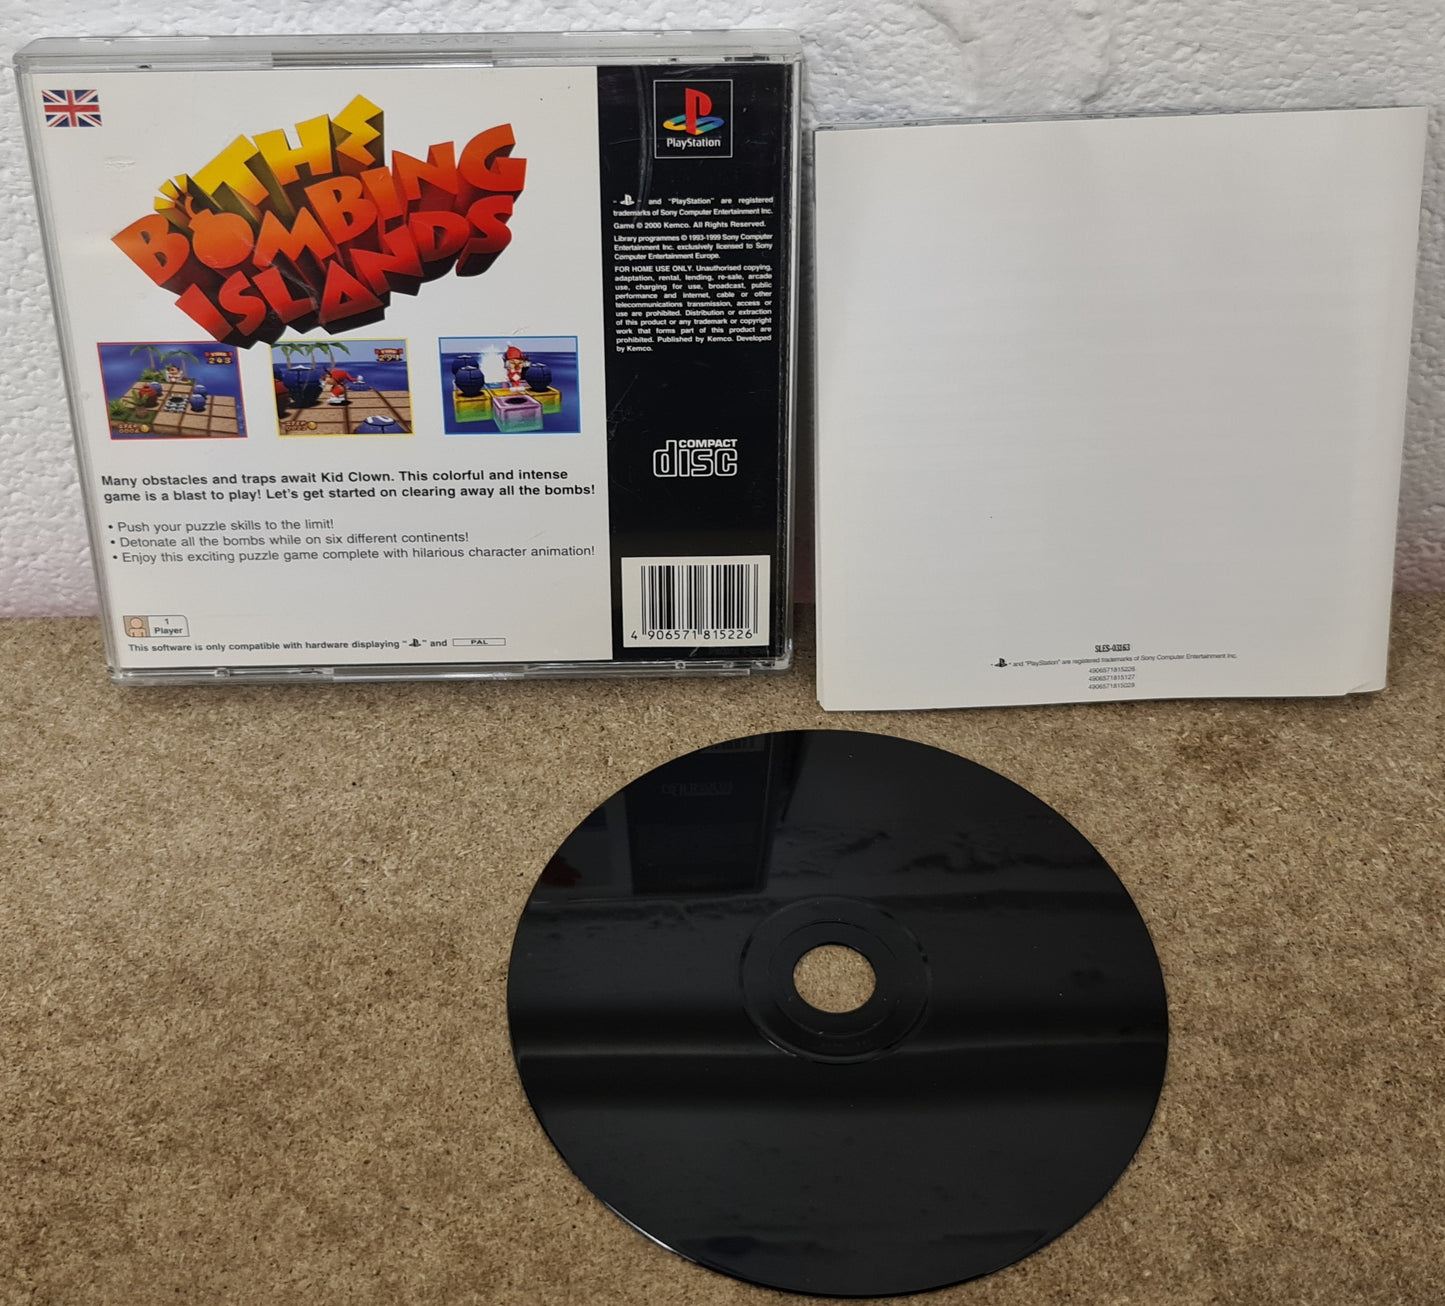 The Bombing Islands Sony Playstation 1 (PS1) Game